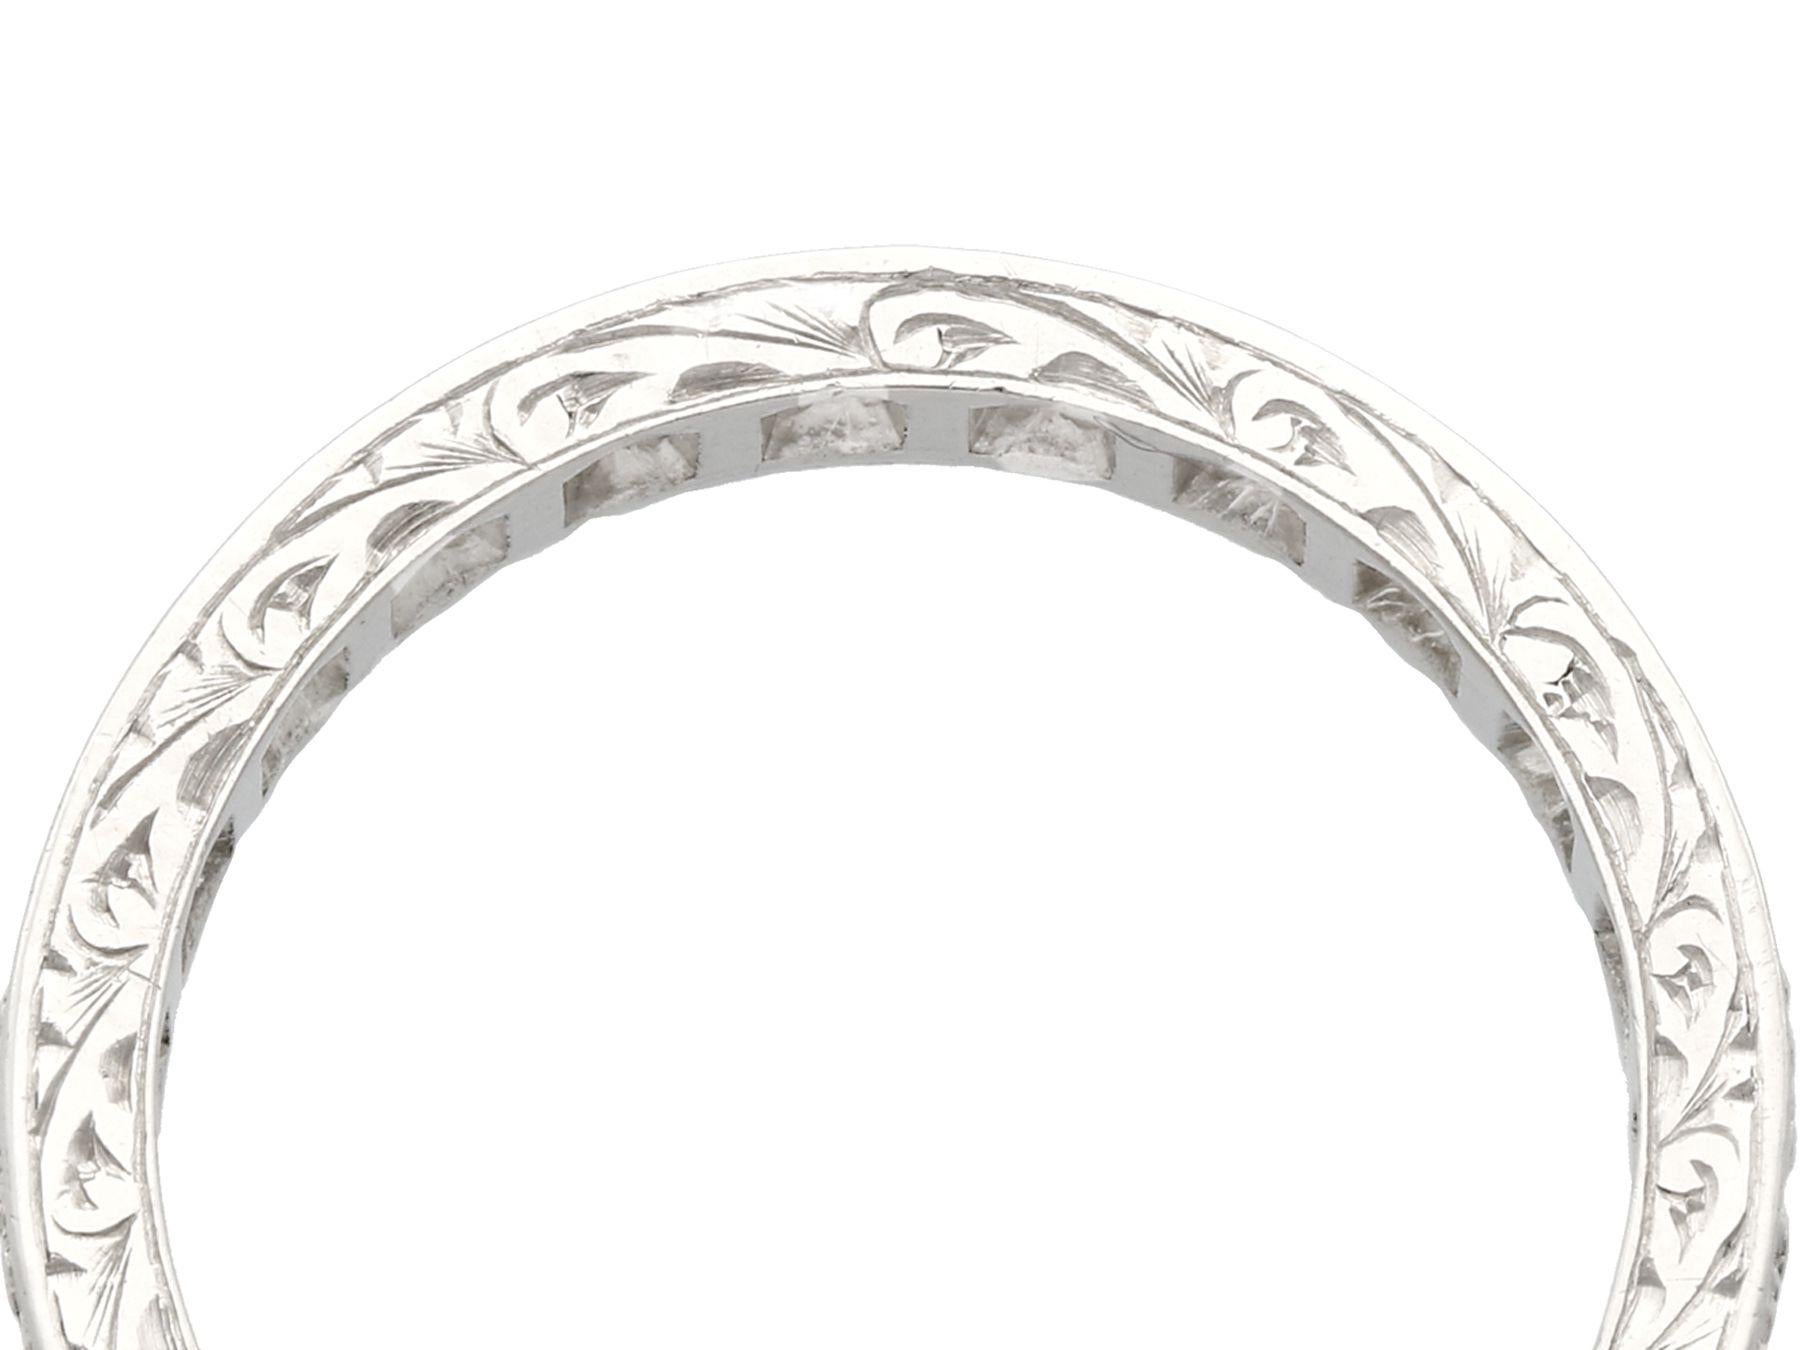 A fine and impressive 0.27 carat diamond and platinum full eternity ring; part of our diverse vintage jewelry and estate jewelry collections

This fine and impressive full diamond eternity ring has been crafted in platinum.

The ring is embellished